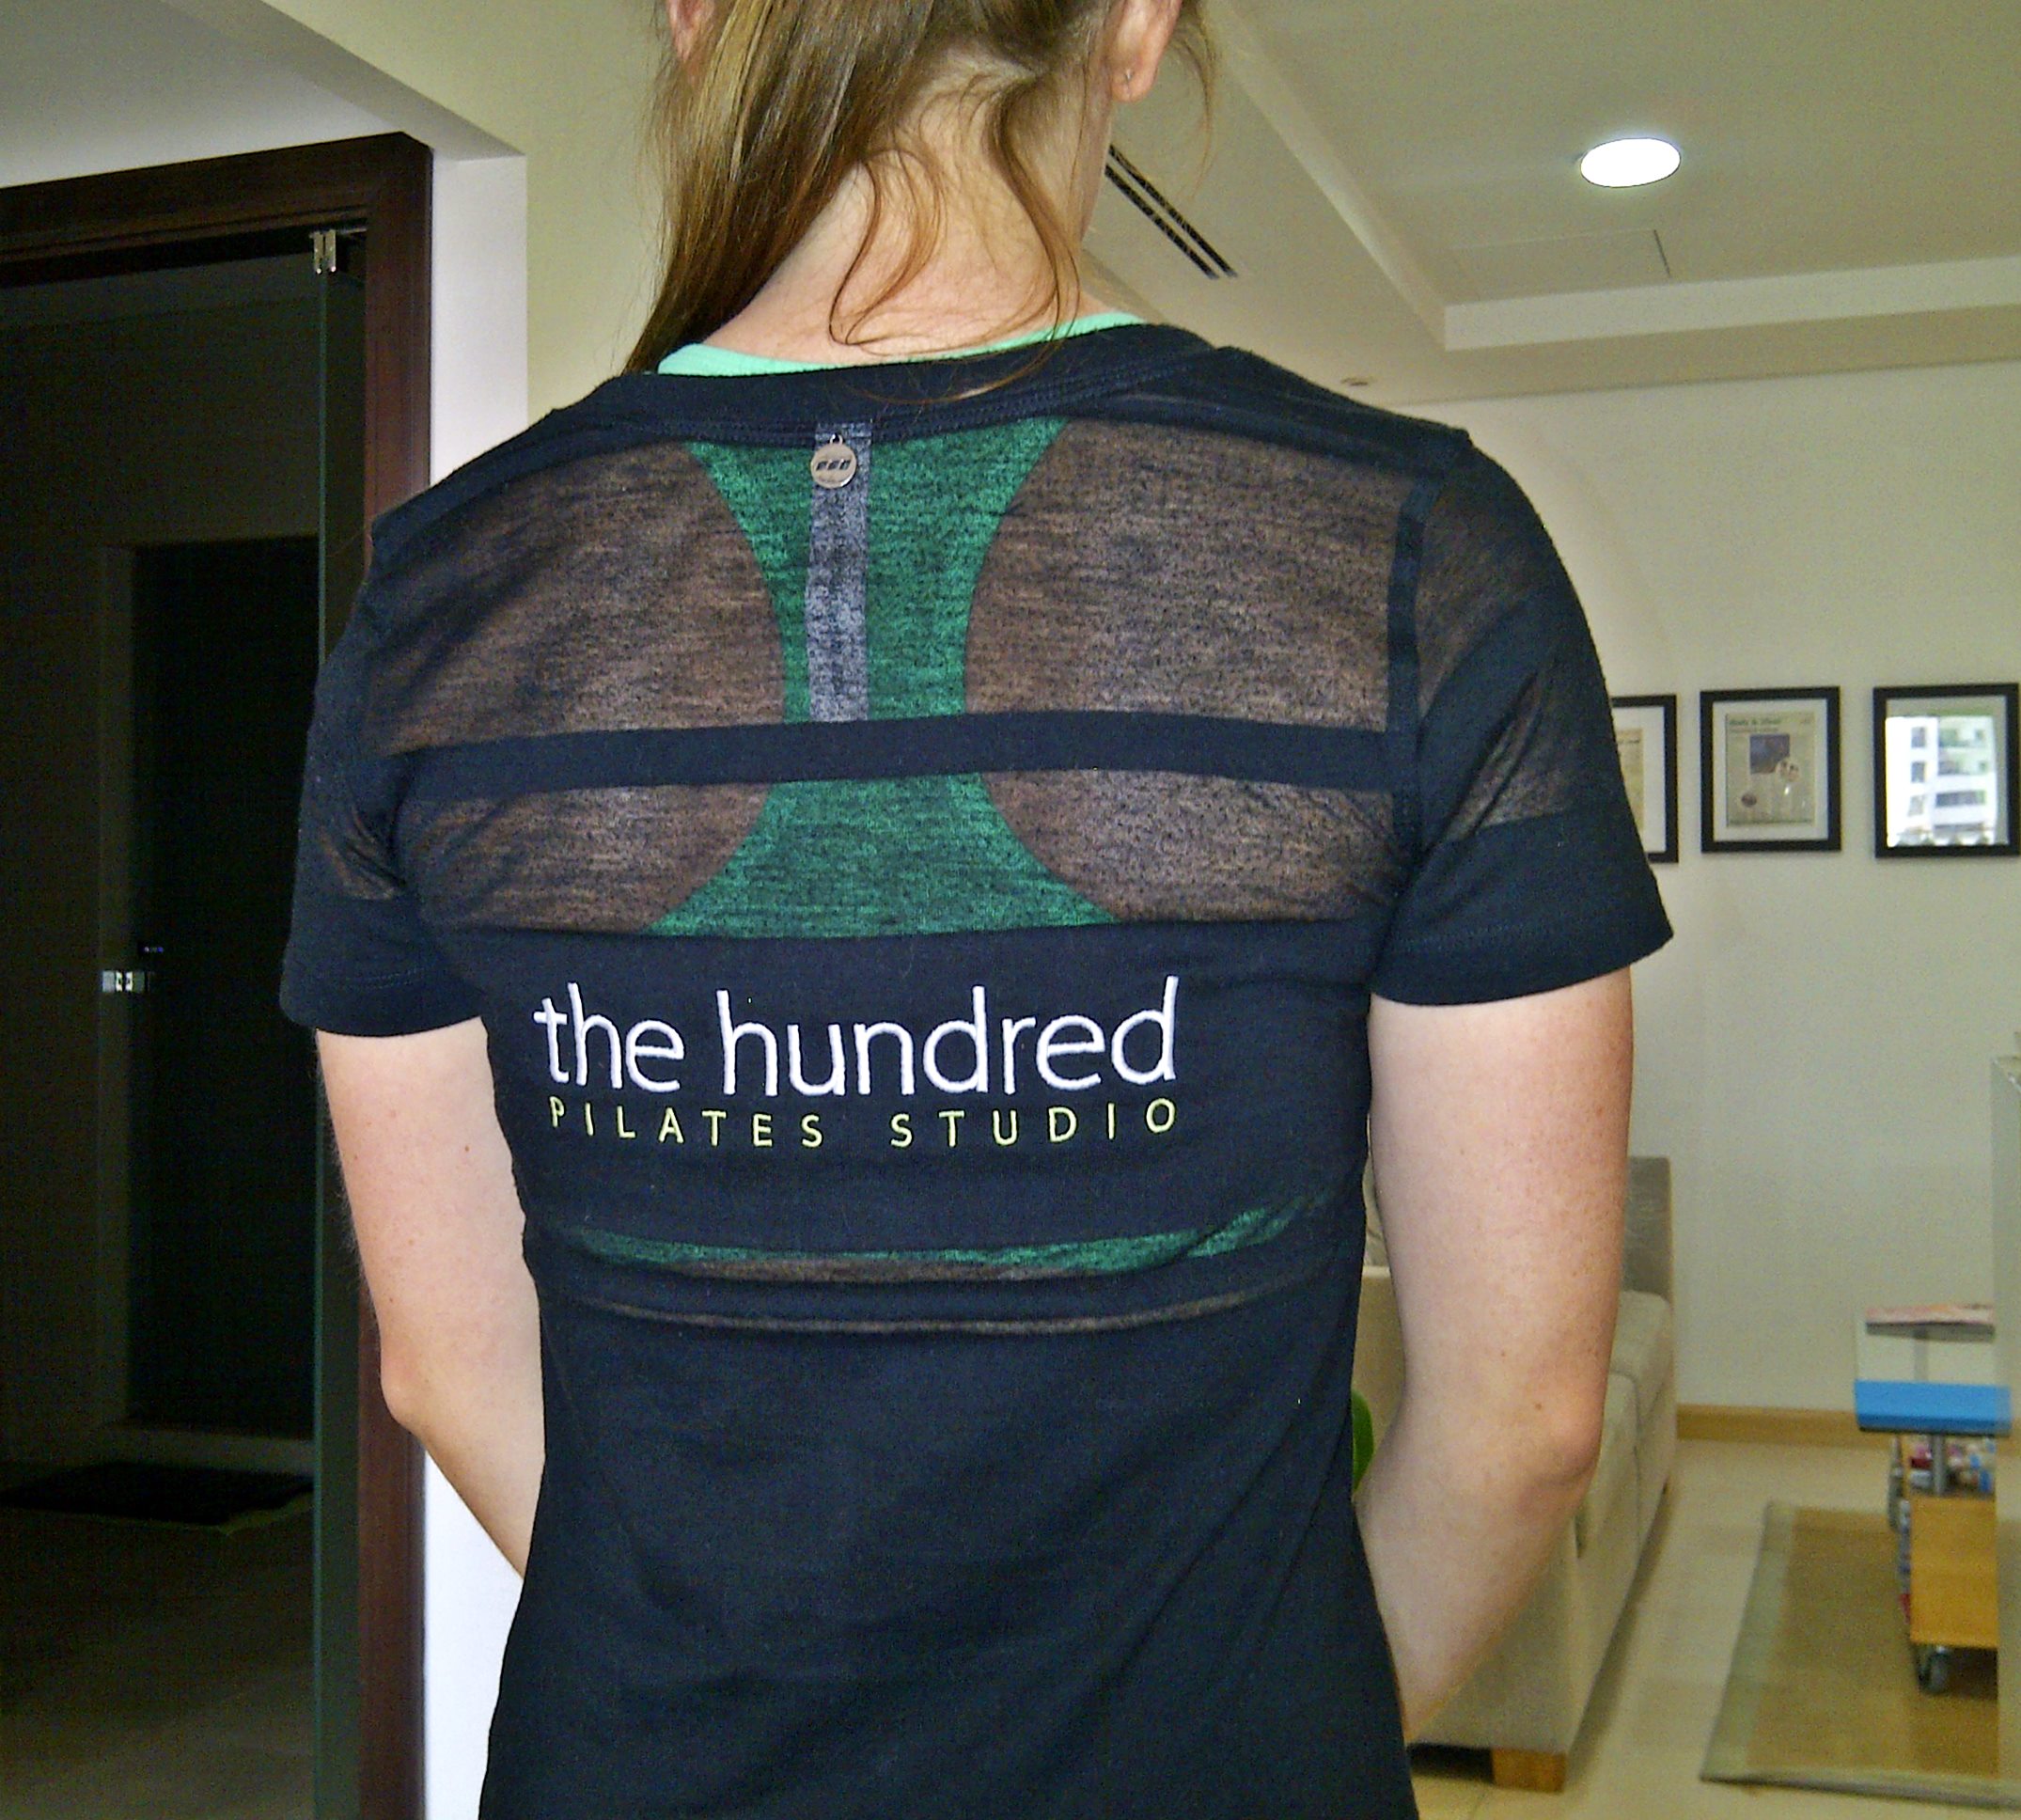 The Hundred Pilates Dubai receive a new revamped uniform look thanks to Lorna Jane's beautiful designs!